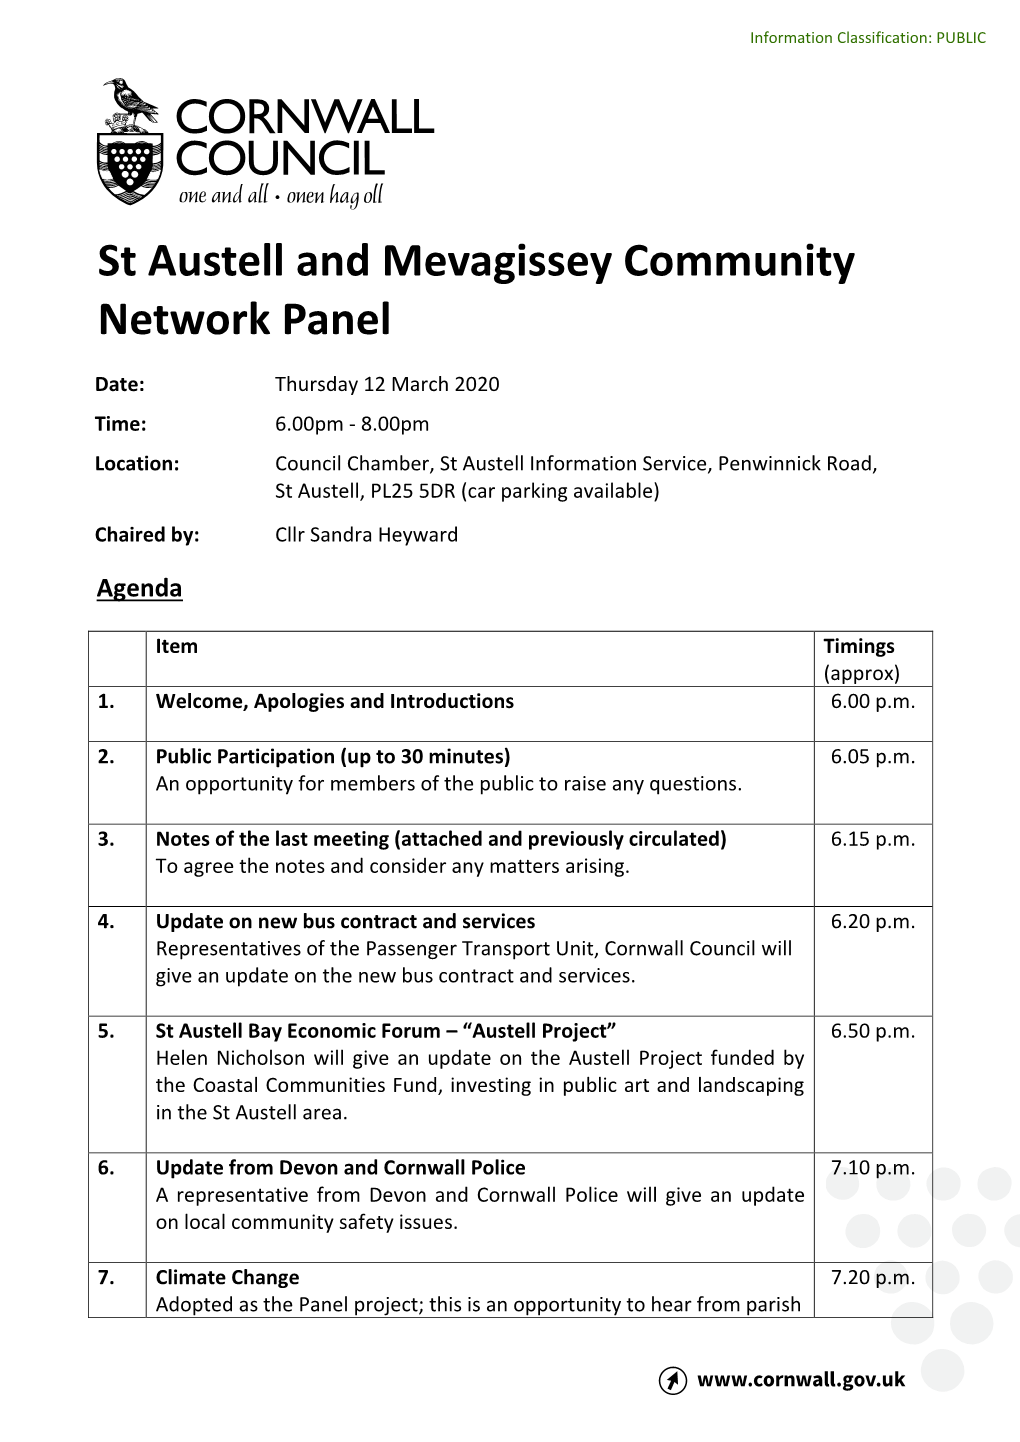 St Austell and Mevagissey Community Network Panel